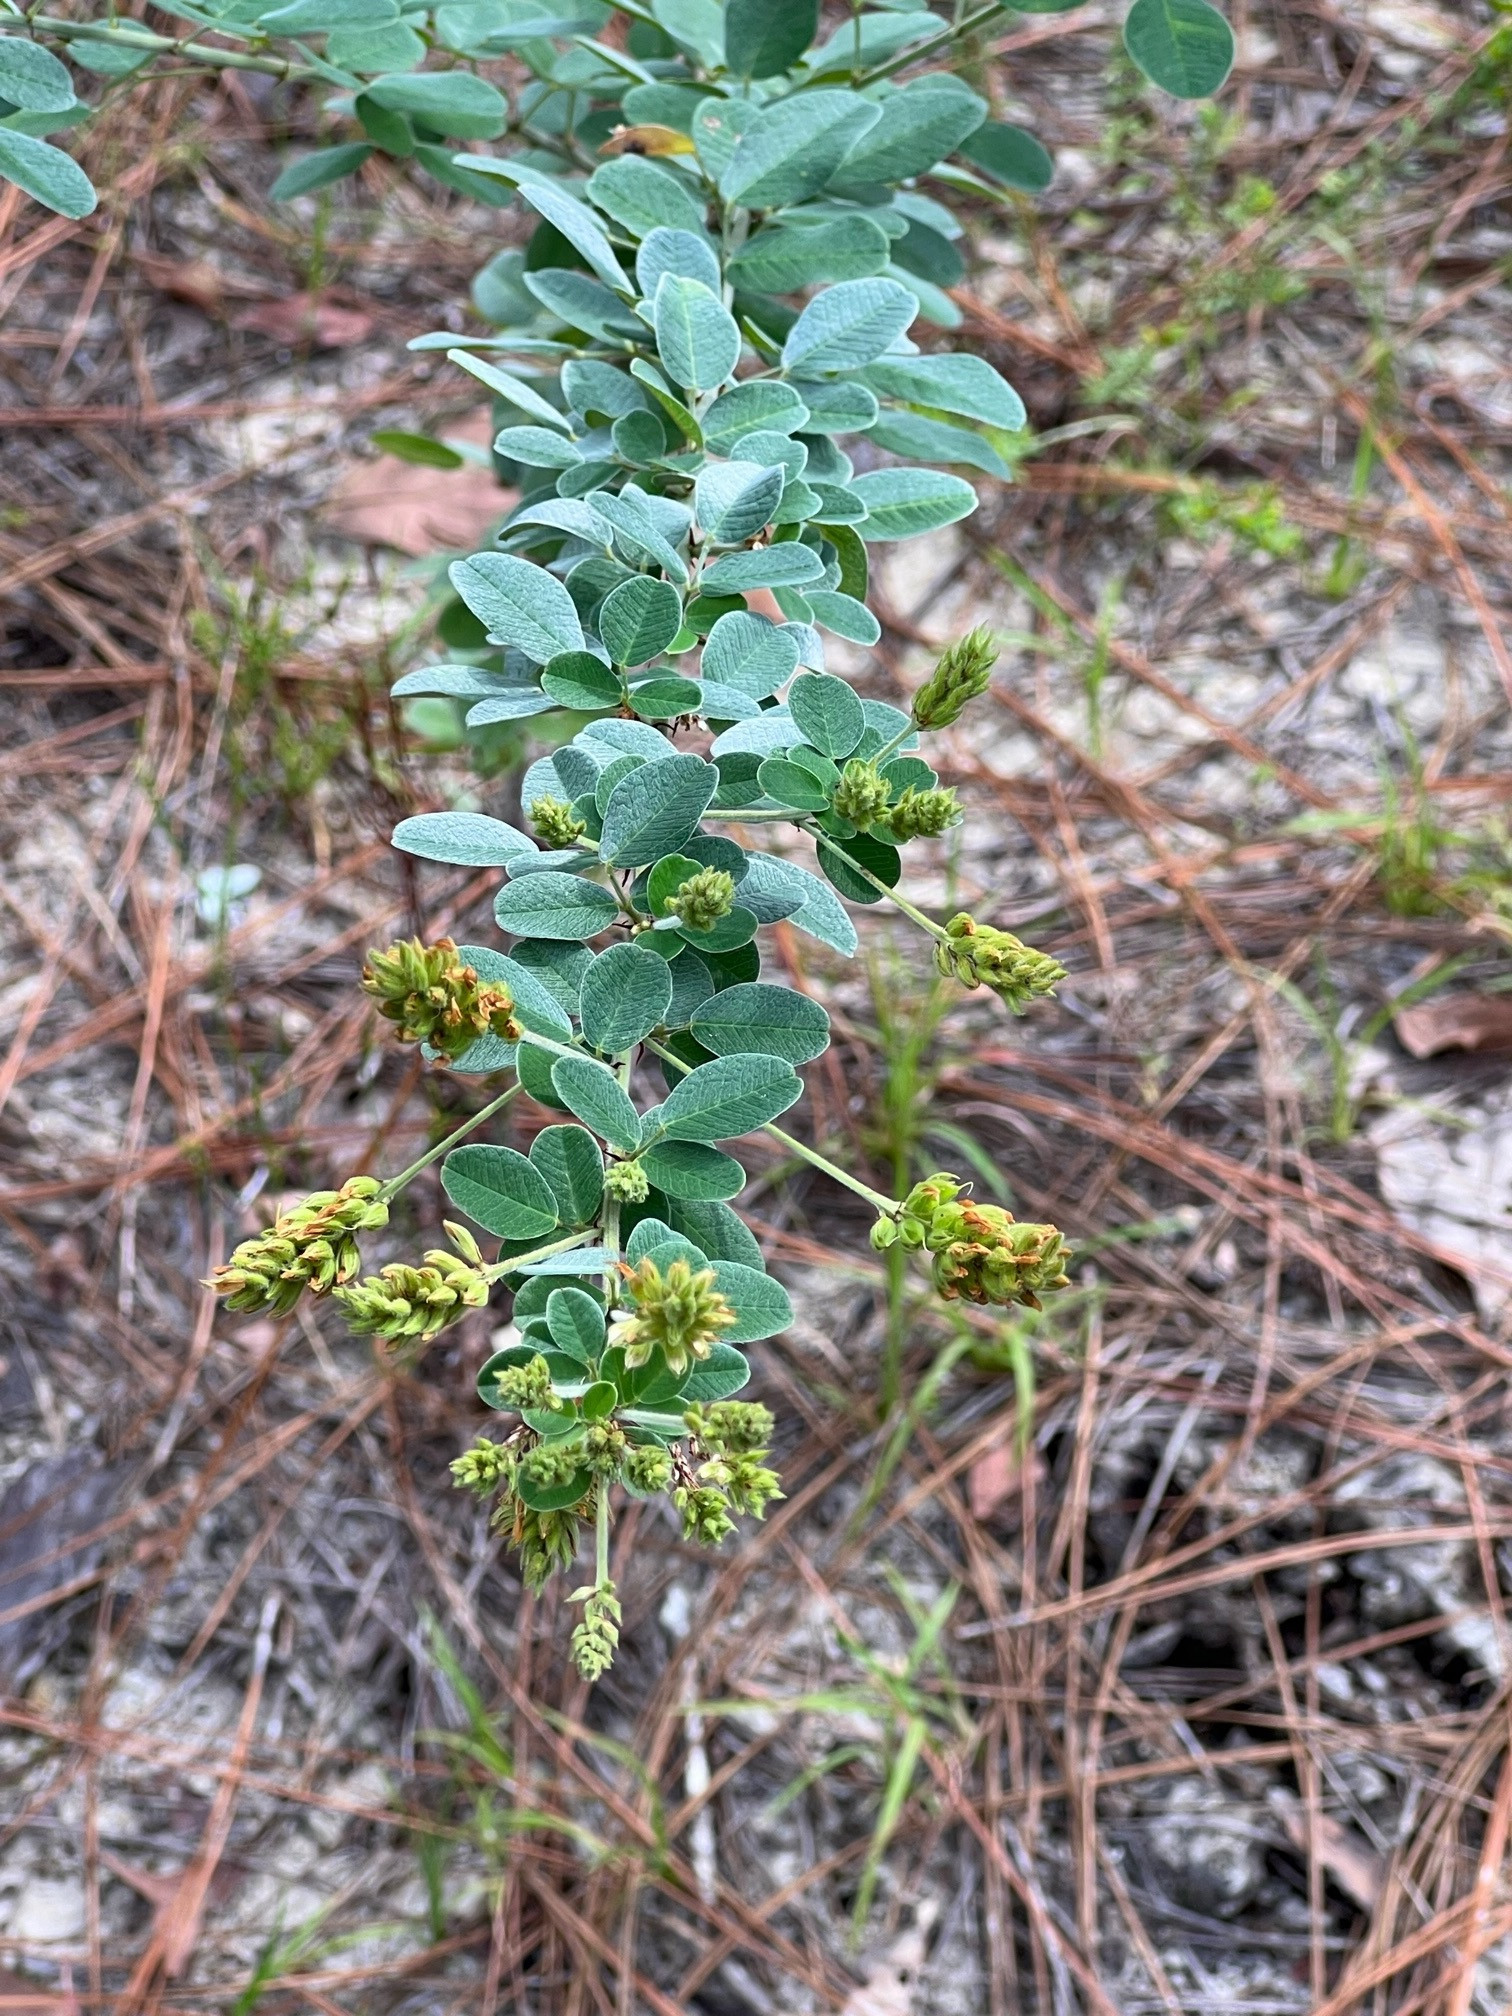 The Scientific Name is Lespedeza capitata. You will likely hear them called Roundhead Bush-clover, Roundhead Lespedeza, Bush-clover. This picture shows the The inflorescences are in very dense racemes. The dense hairs on the leaves give the foliage a silvery sheen. of Lespedeza capitata